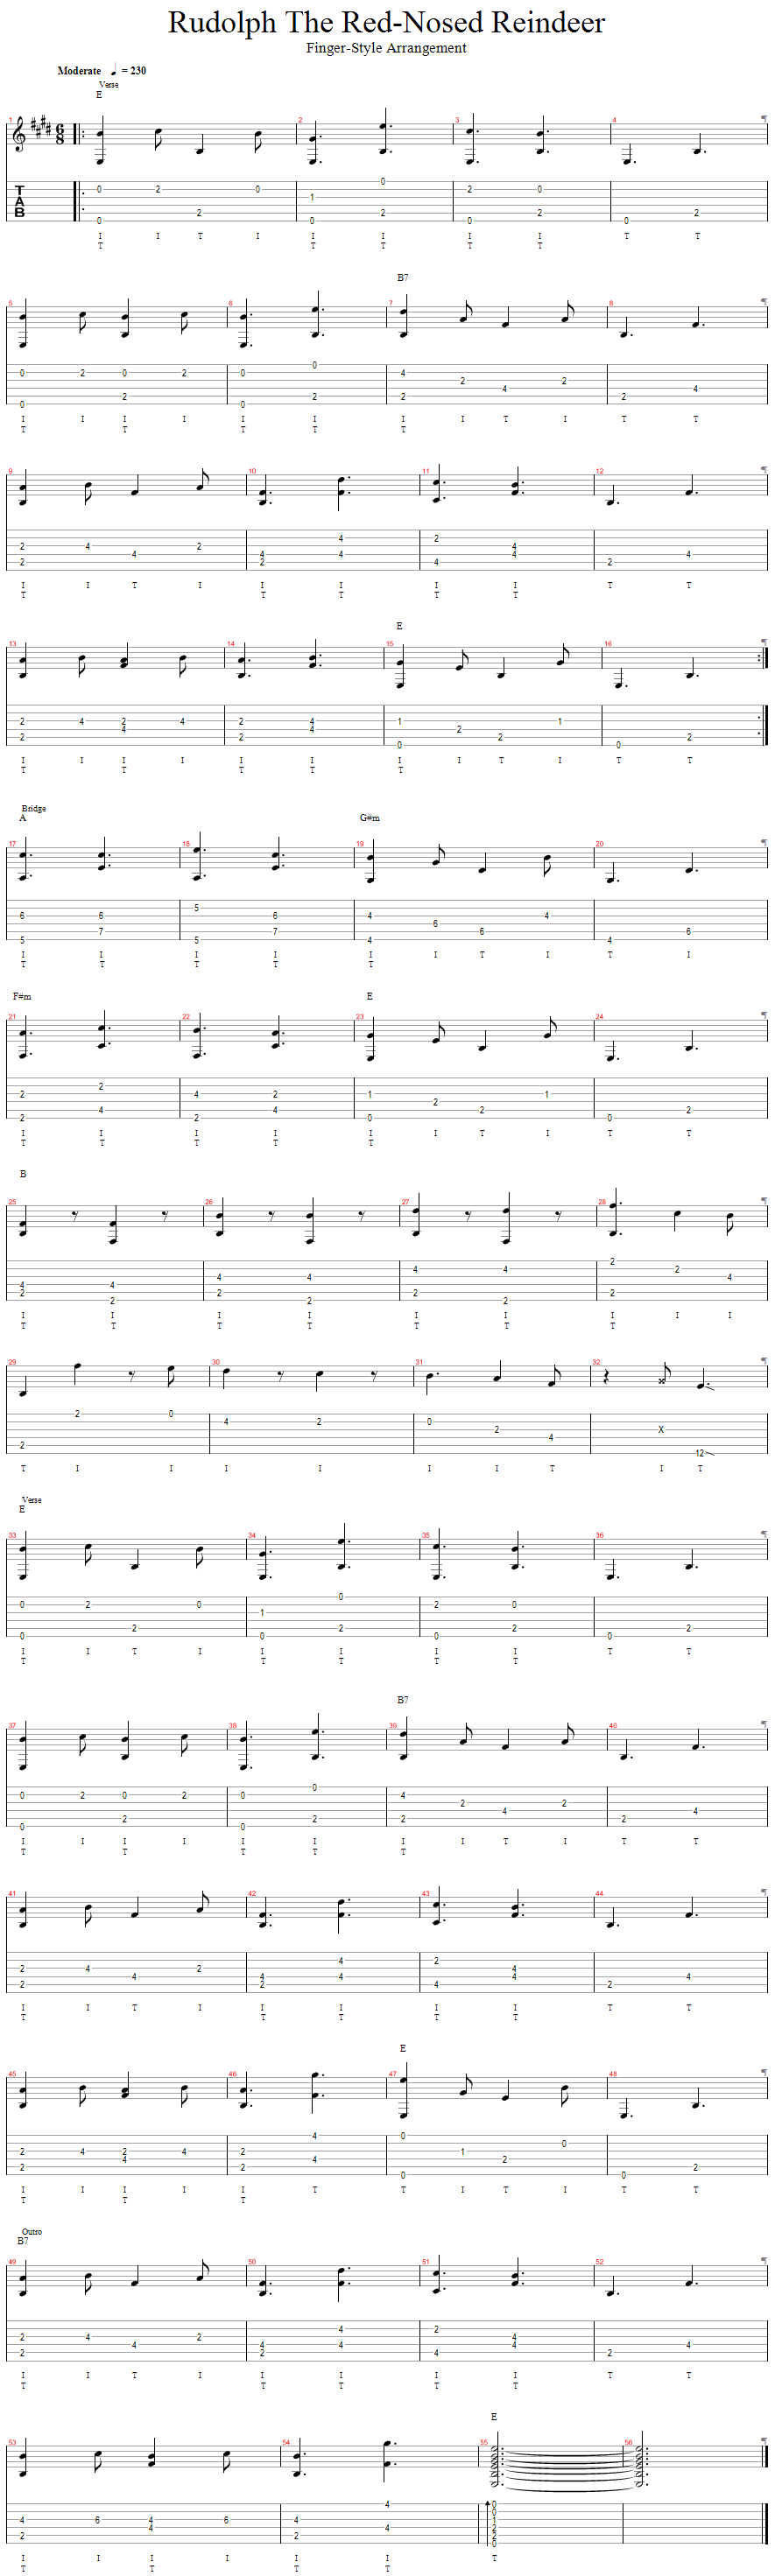 Tablature for A Chet-Style Rudolph - Performance